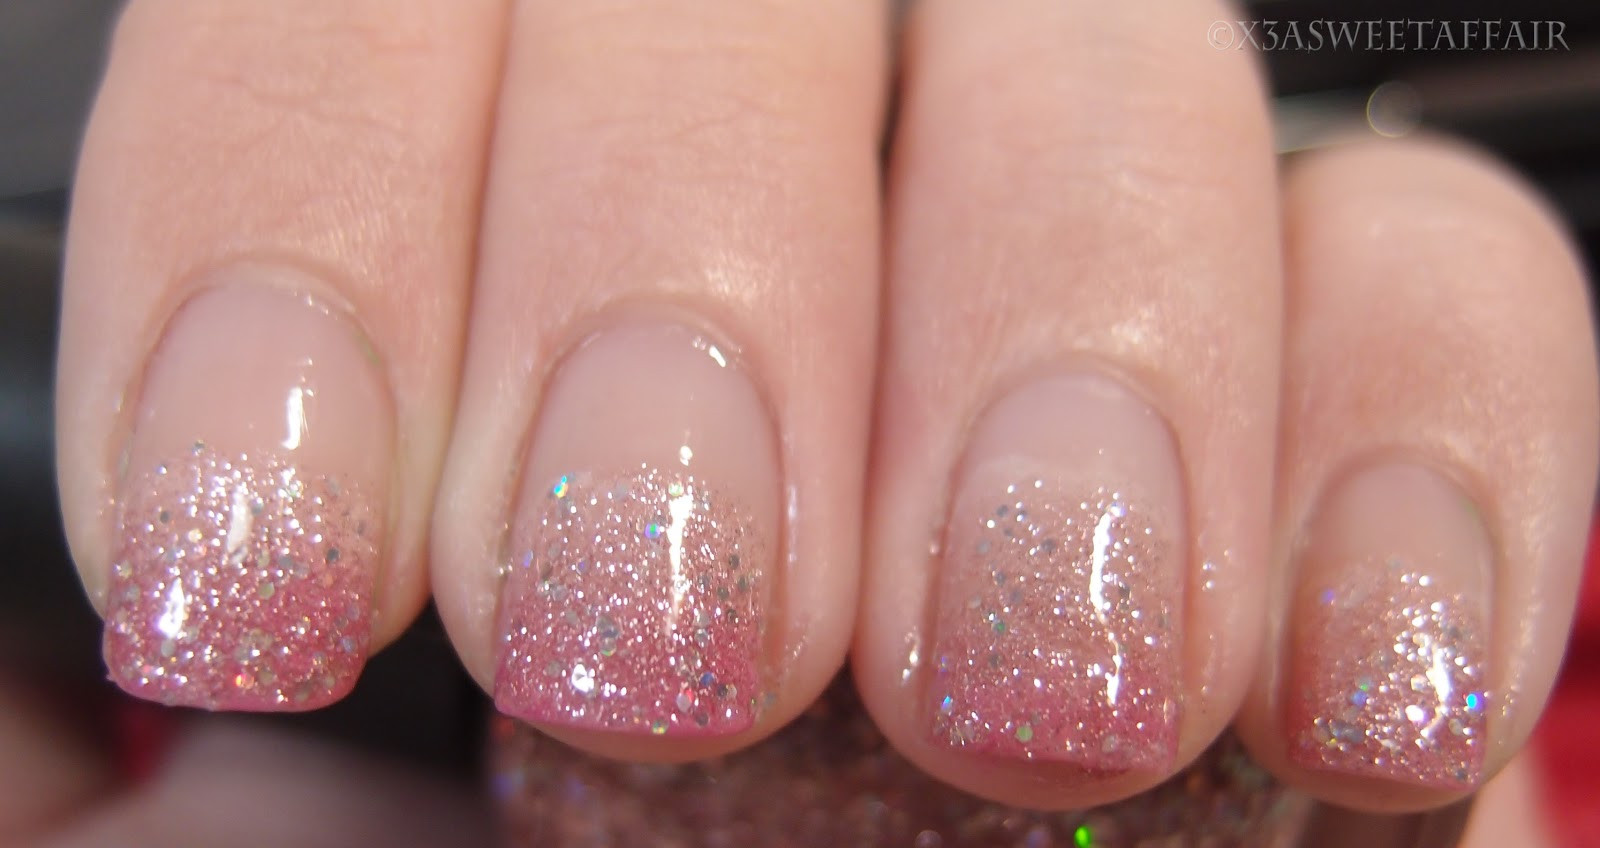 Ombre Glitter Nails
 x3ASweetAffair Naturally Nails Pink ombre glitter